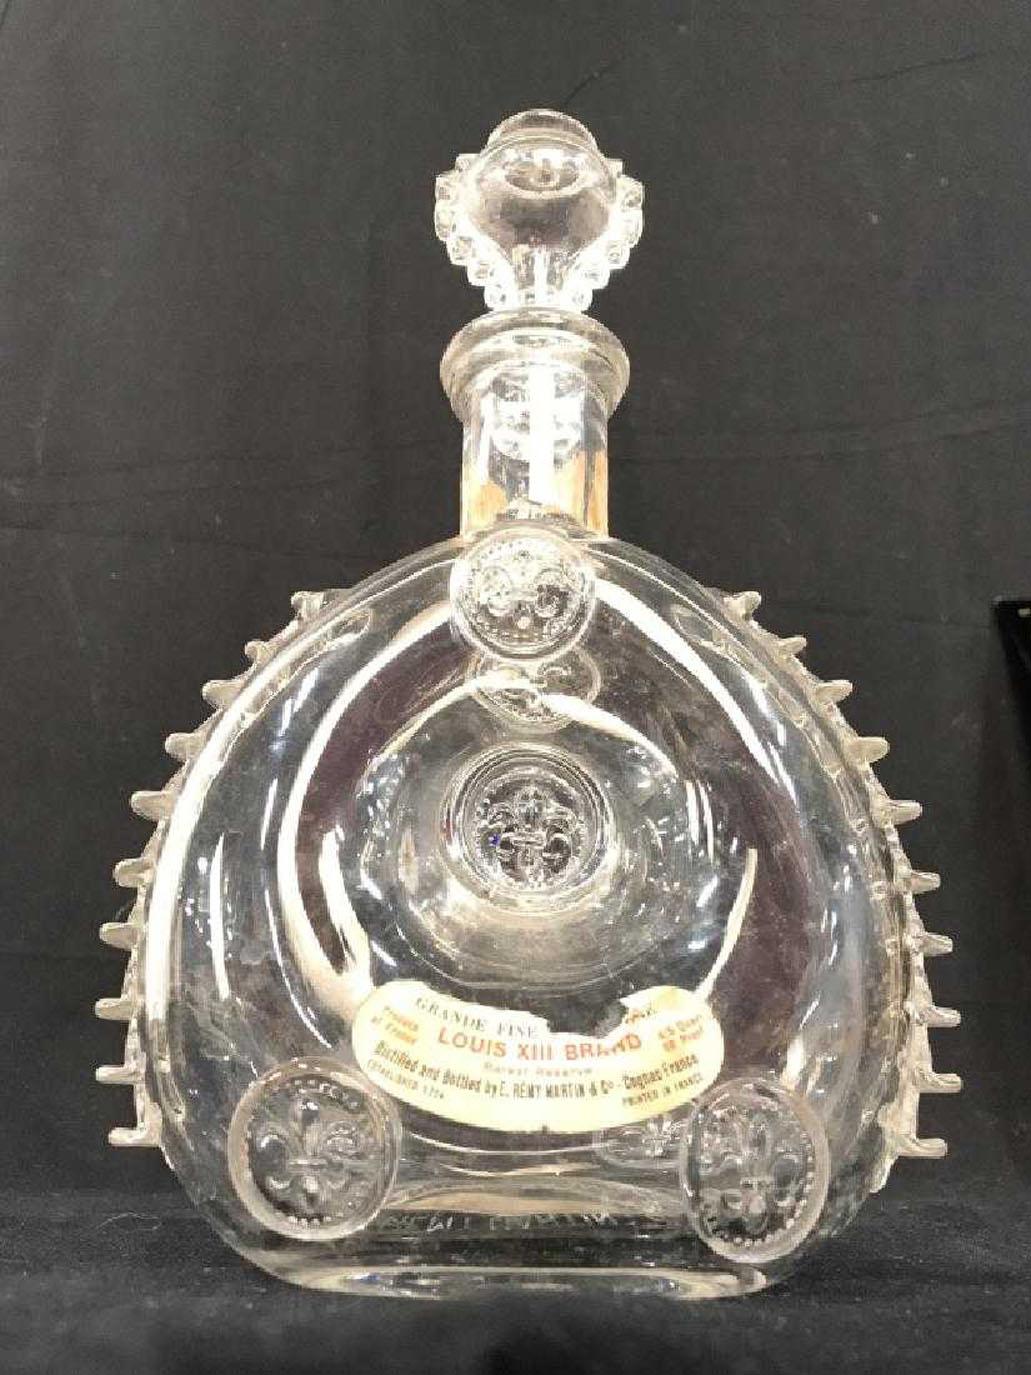 Baccarat Remy Martin Louis XIII Decanter 2